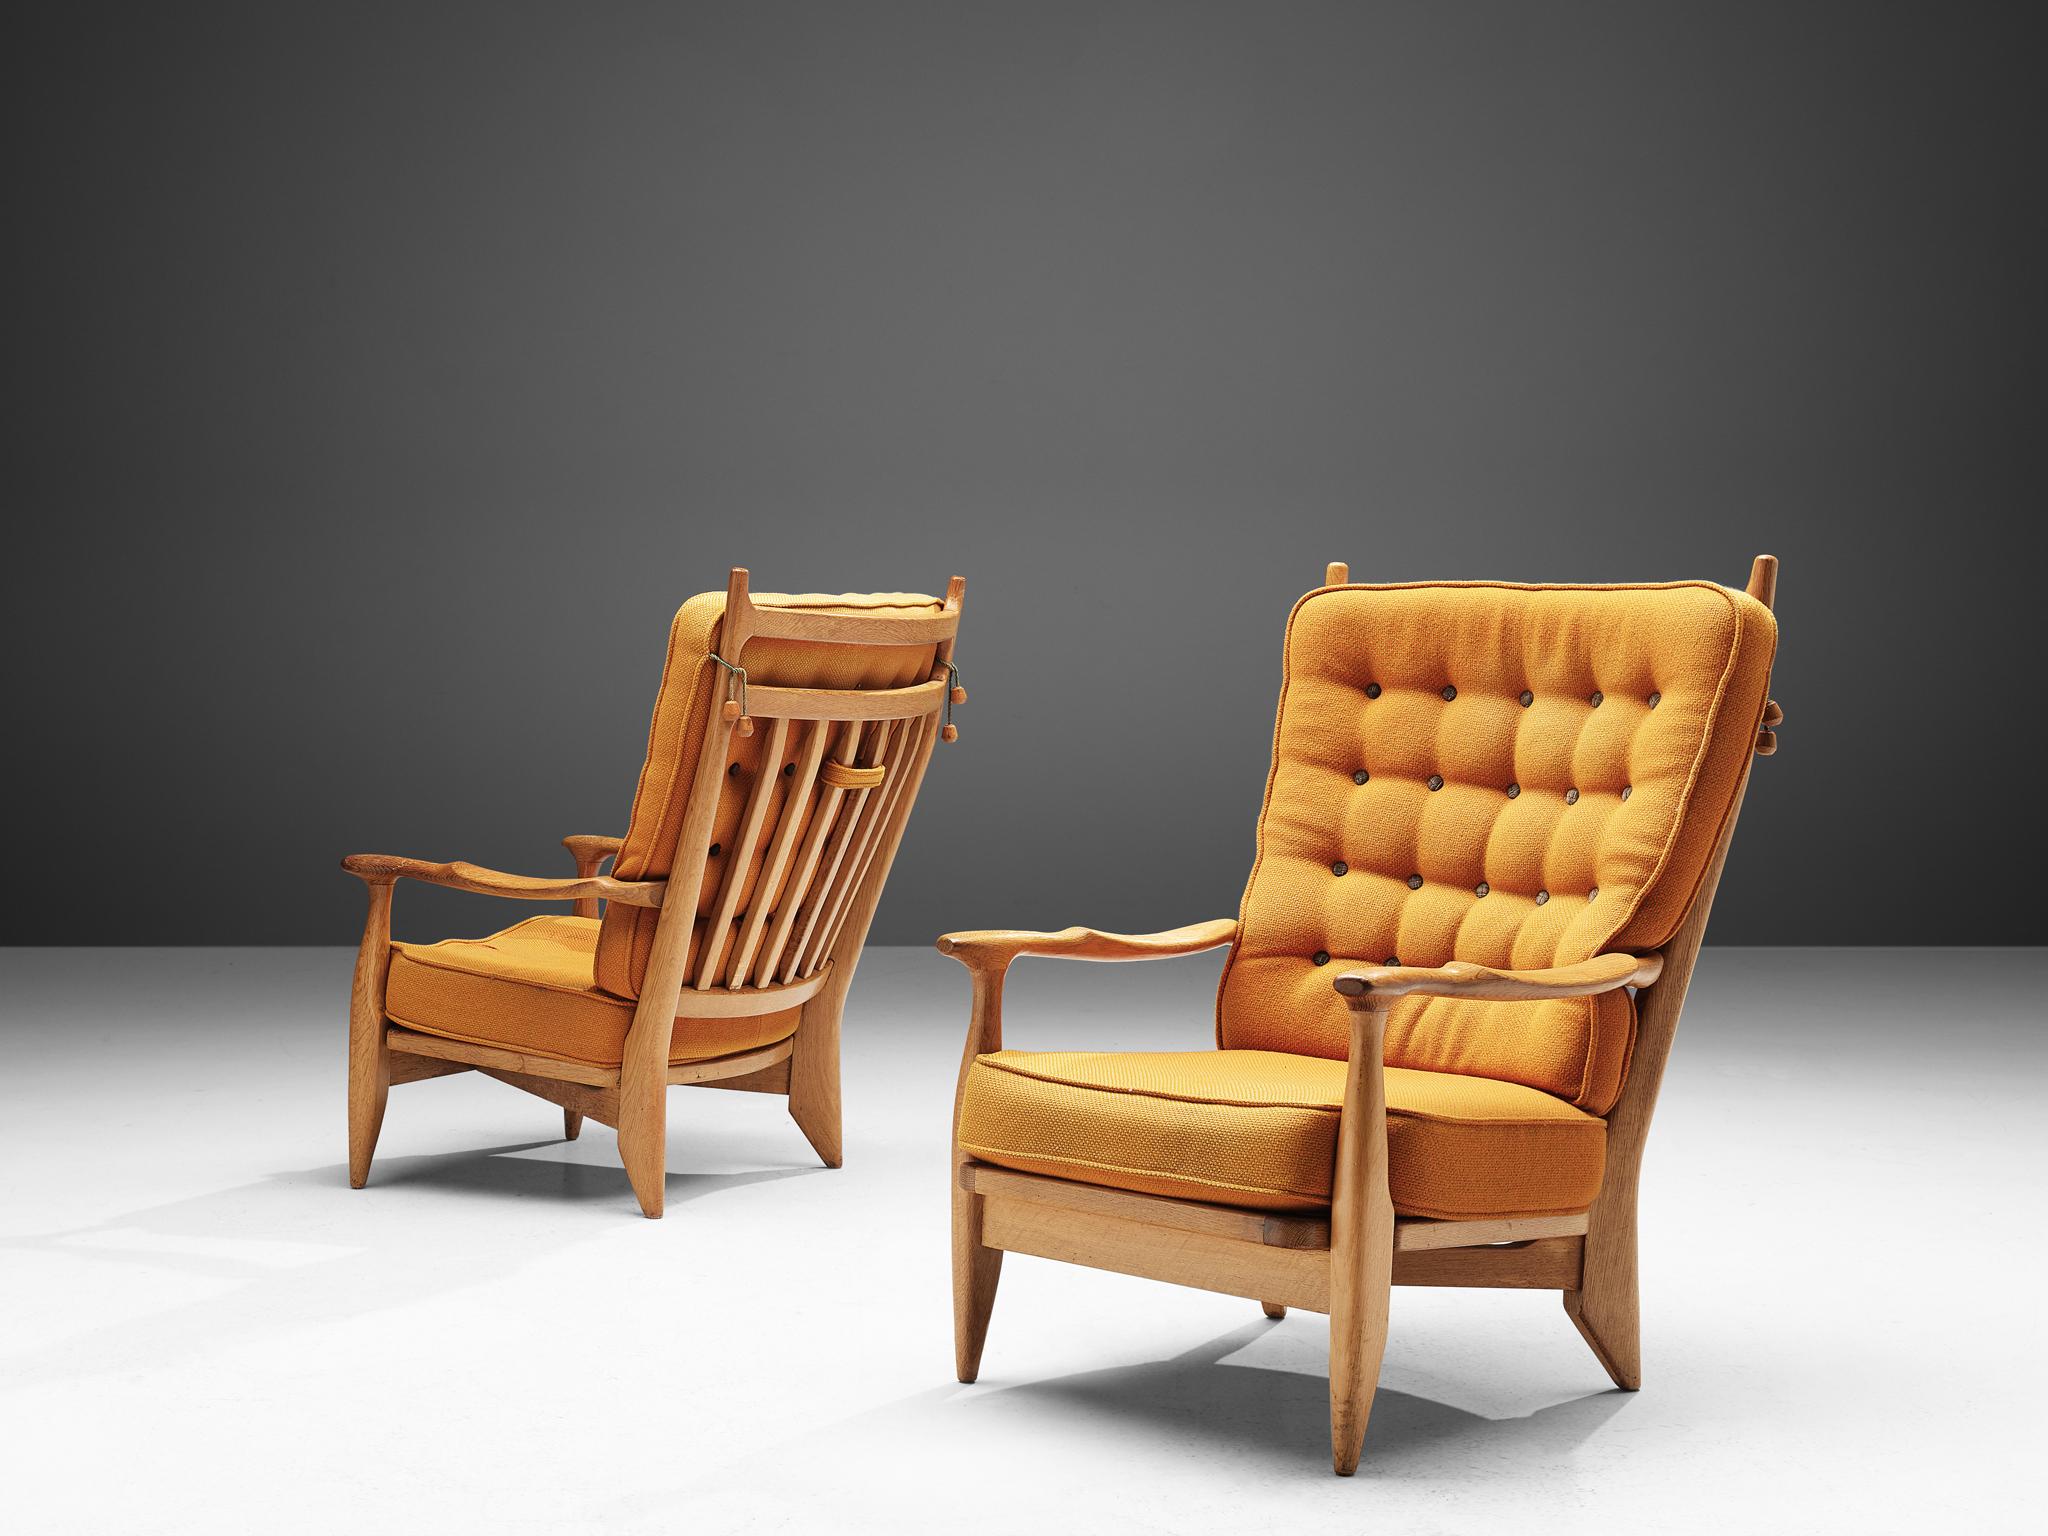 Guillerme et Chambron, set of two lounge chairs oak, yellow upholstery, oak, France, 1960s. 

Guillerme and Chambron are known for their high quality solid oak furniture, of which these two lounge chairs are another great example. These chairs have